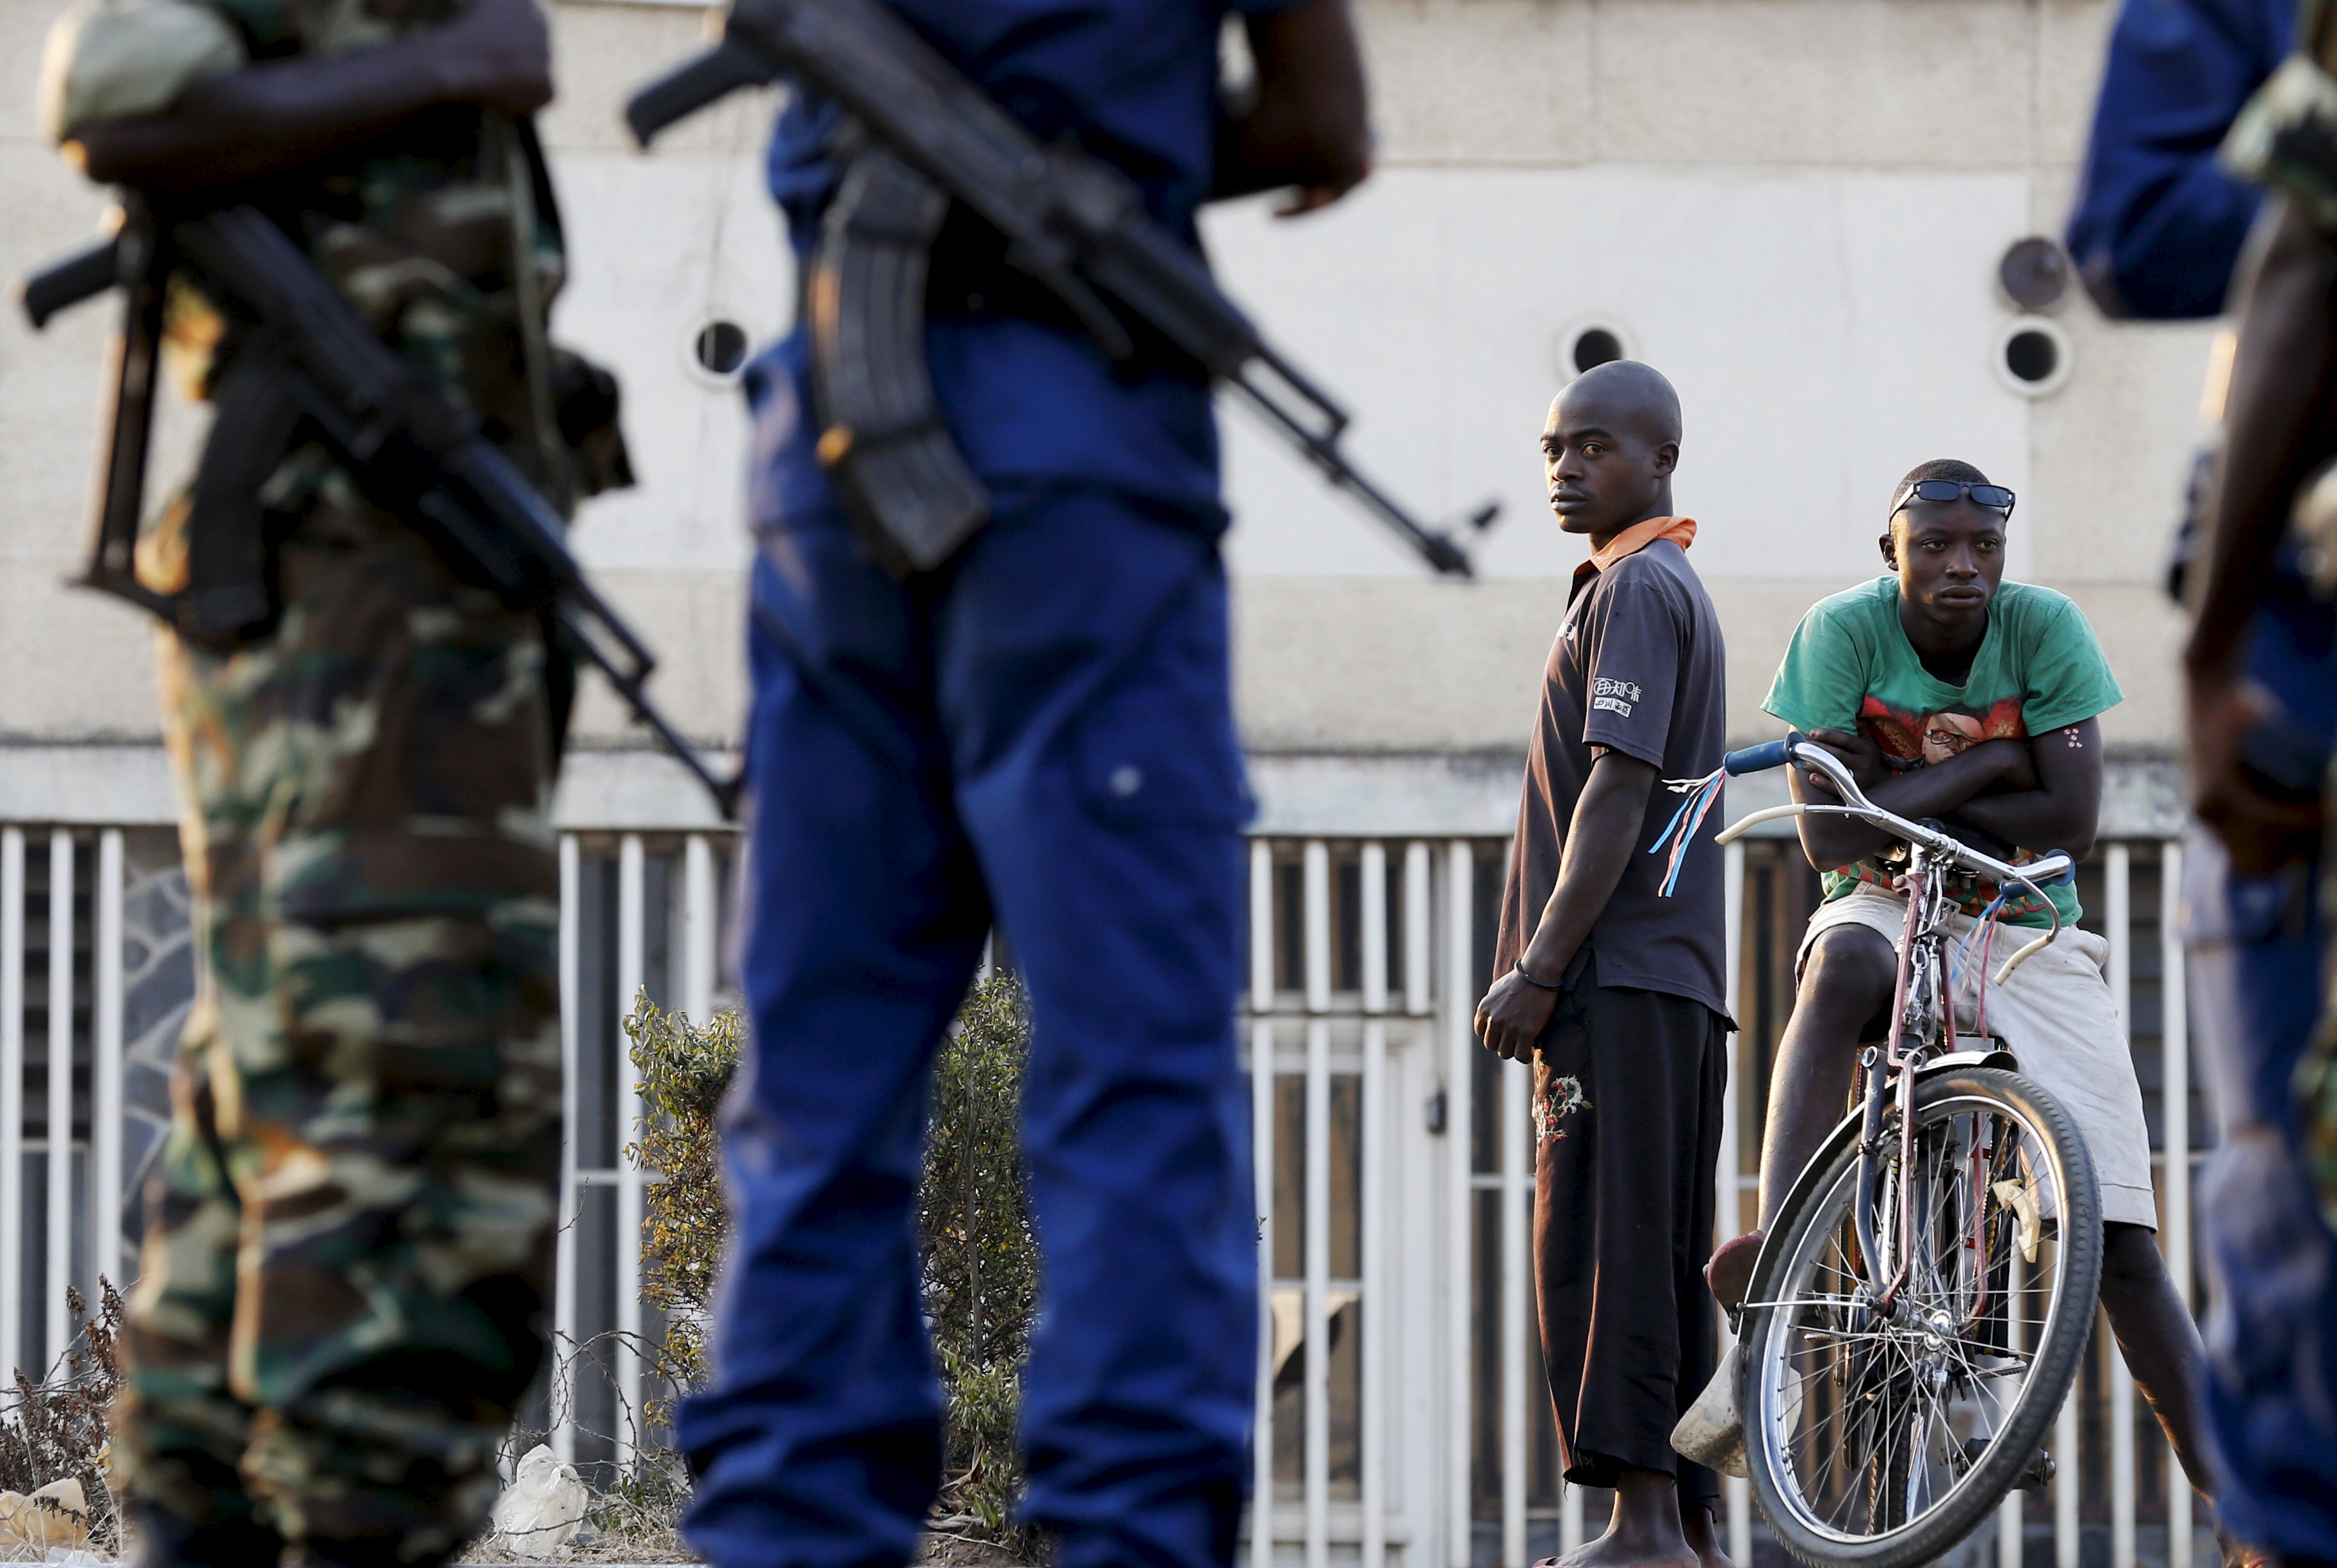 Residents look on as police and soldiers guard a voting station in Burundi's capital Bujumbura during the country's presidential elections, July 21, 2015 (Mike Hutchings—REUTERS)